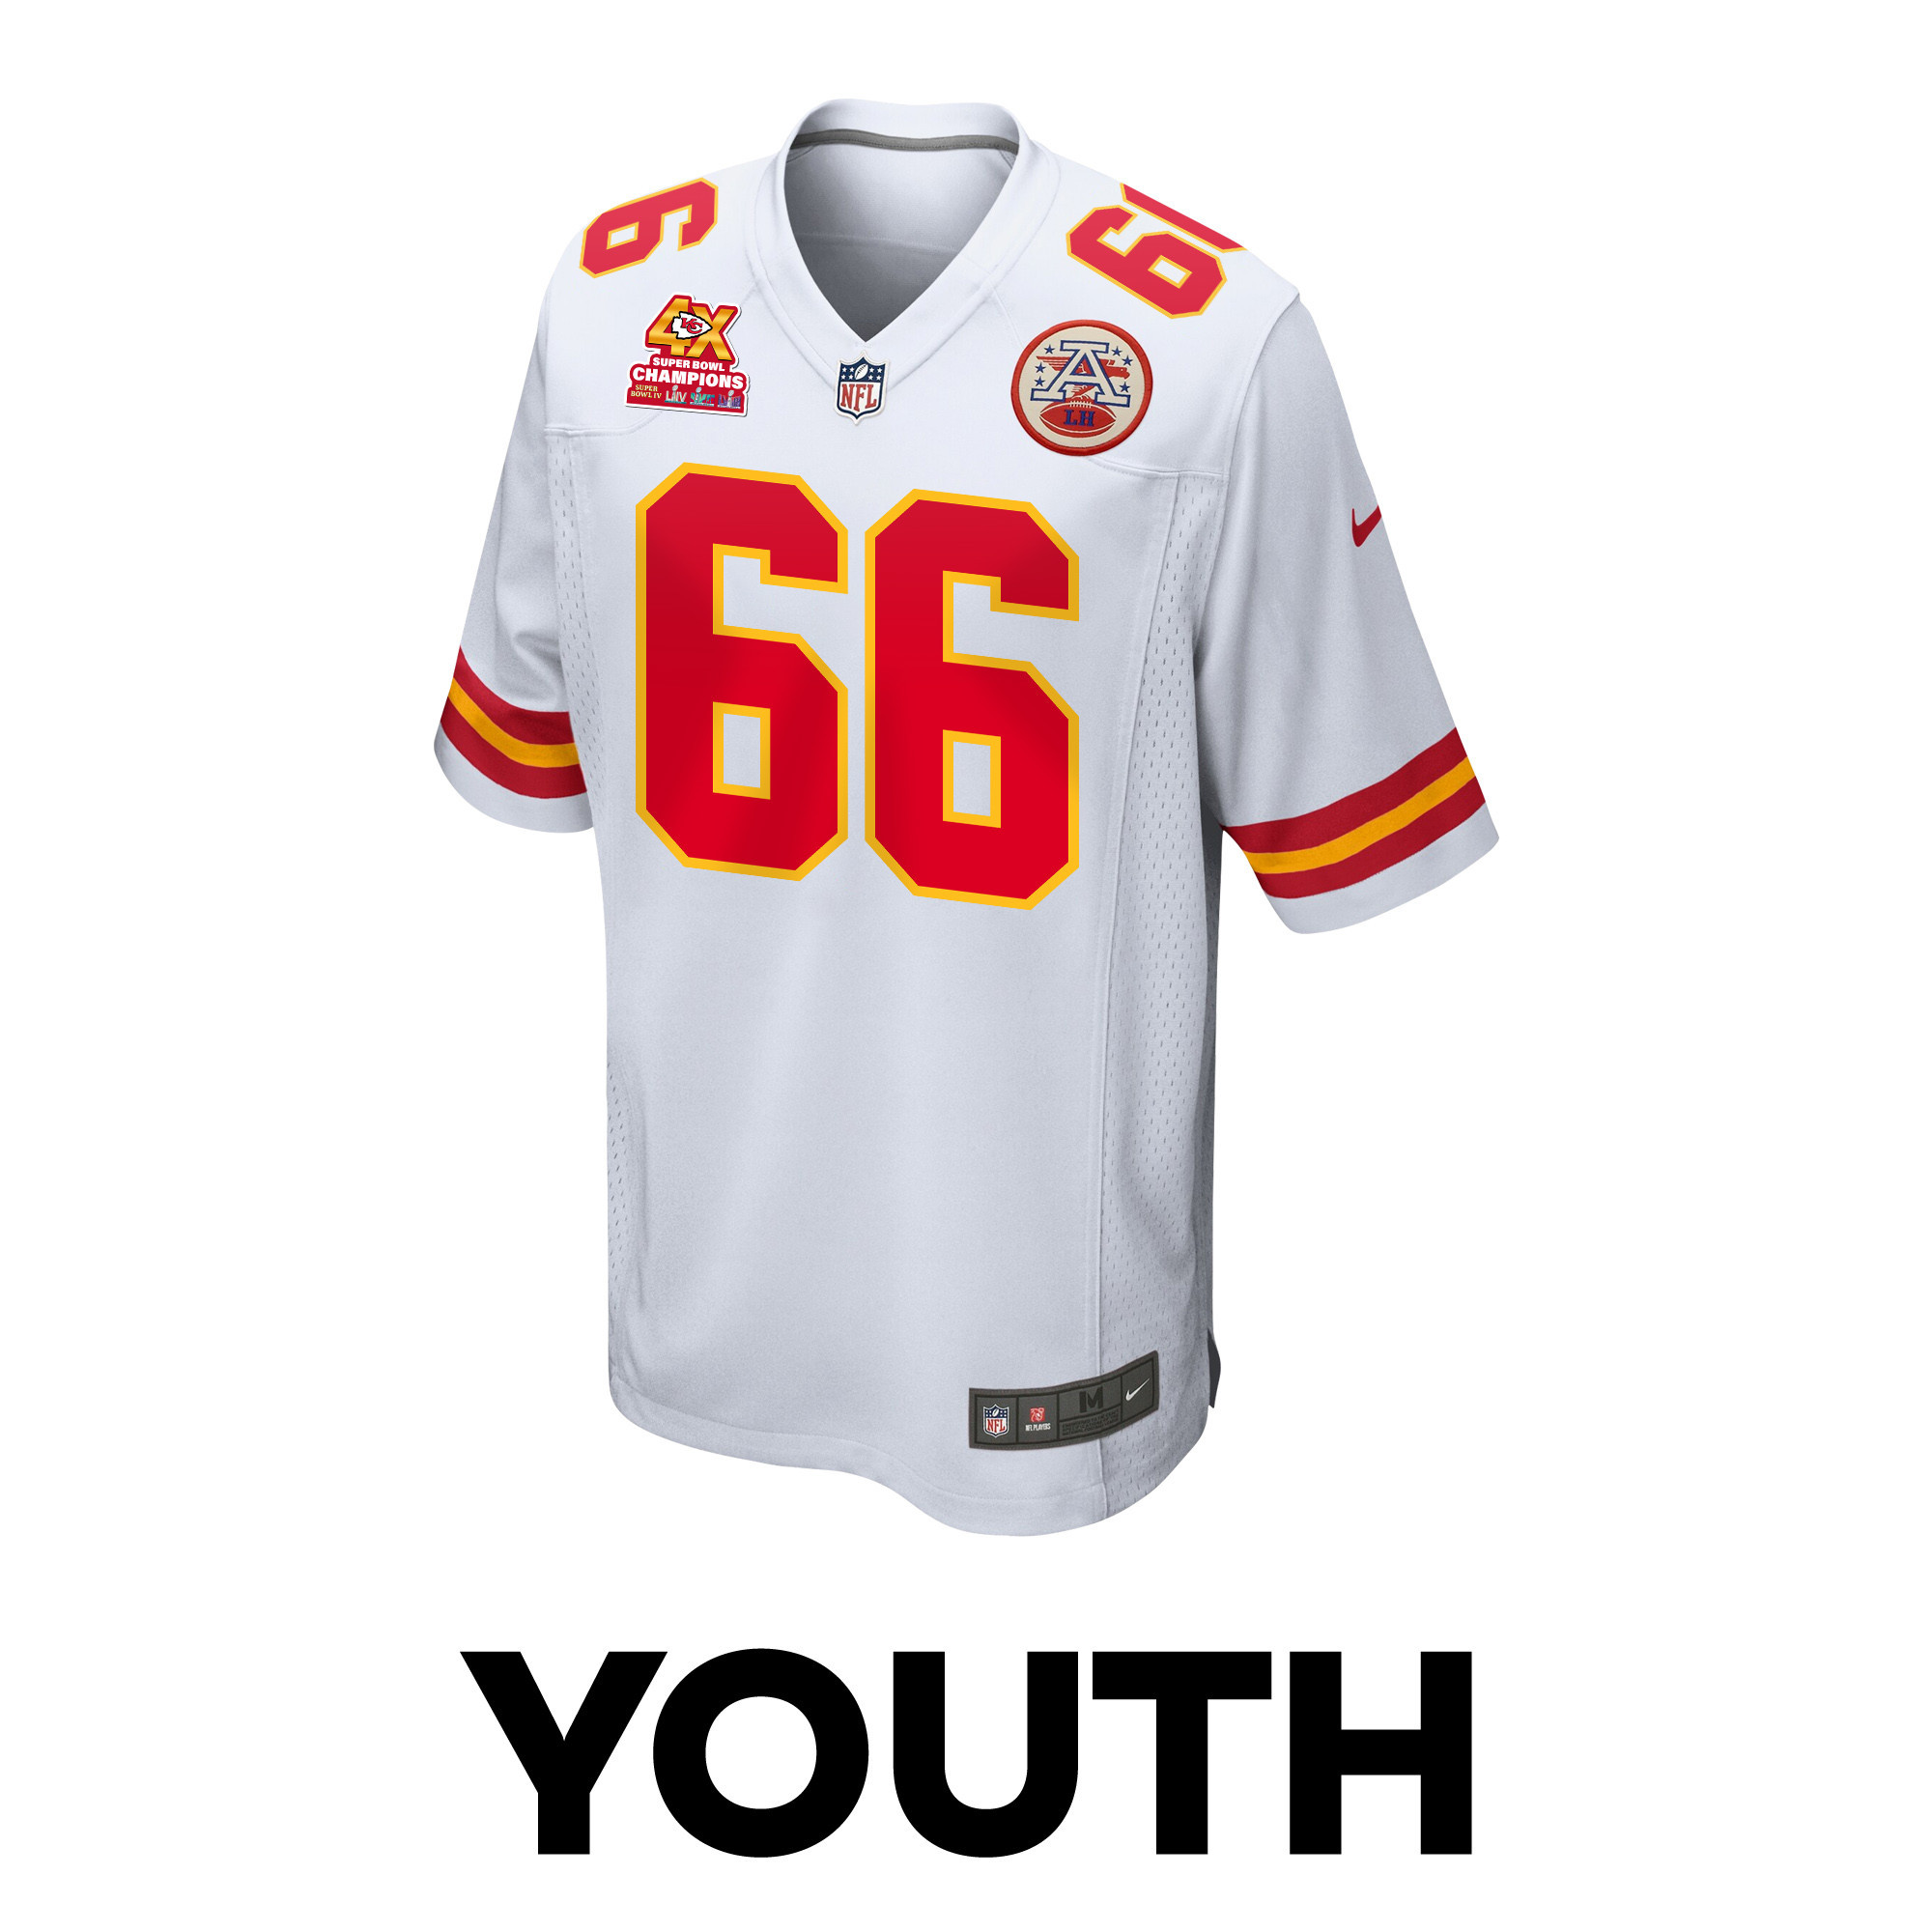 Mike Caliendo 66 Kansas City Chiefs Super Bowl LVIII Champions 4X Game YOUTH Jersey - White